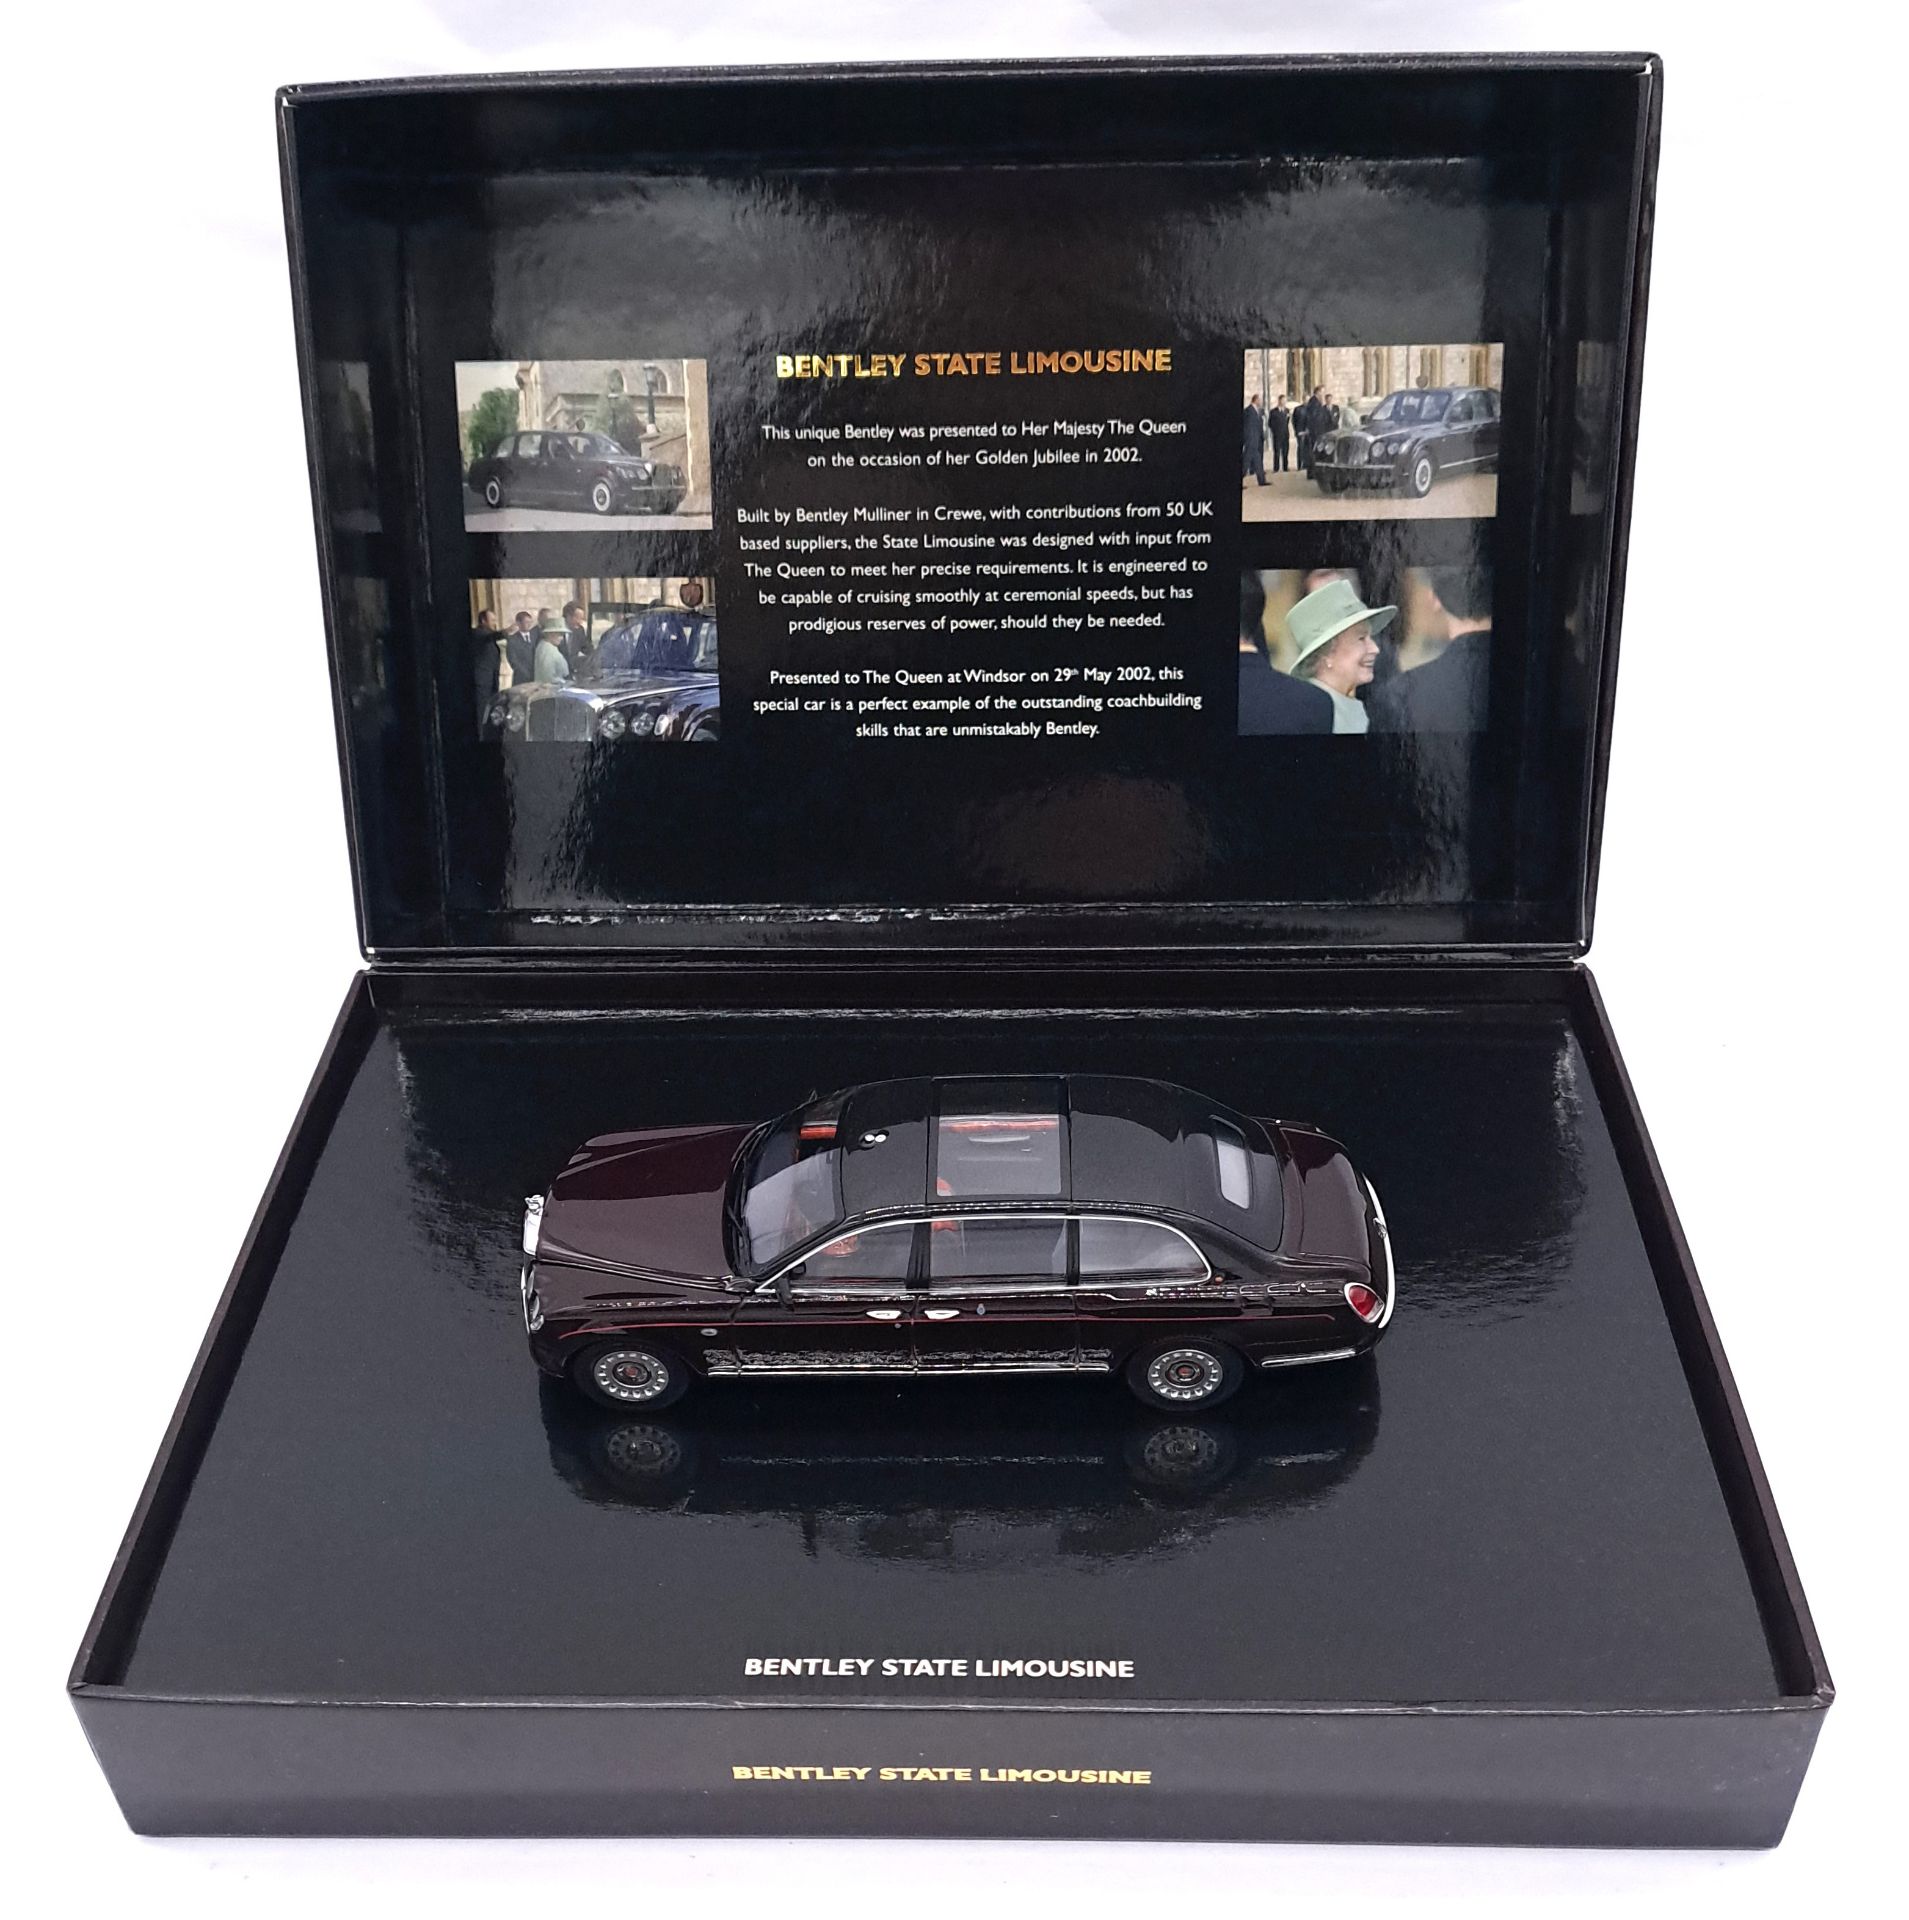 Minichamps 1/43rd scale Bentley State Limousine